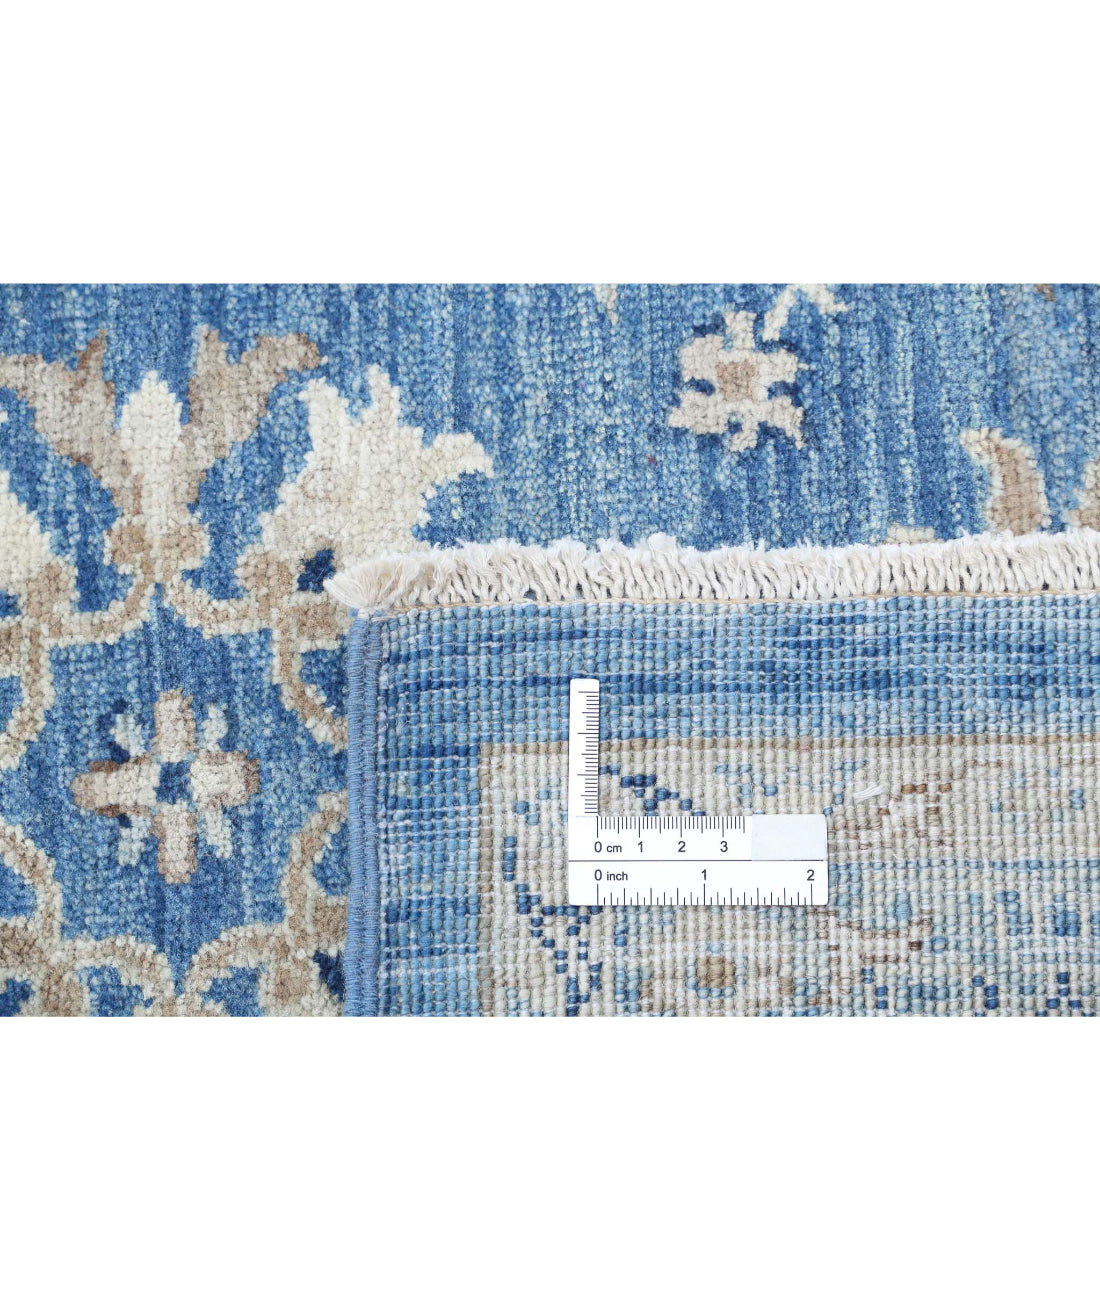 Serenity 8'1'' X 11'5'' Hand-Knotted Wool Rug 8'1'' x 11'5'' (243 X 343) / Blue / Ivory